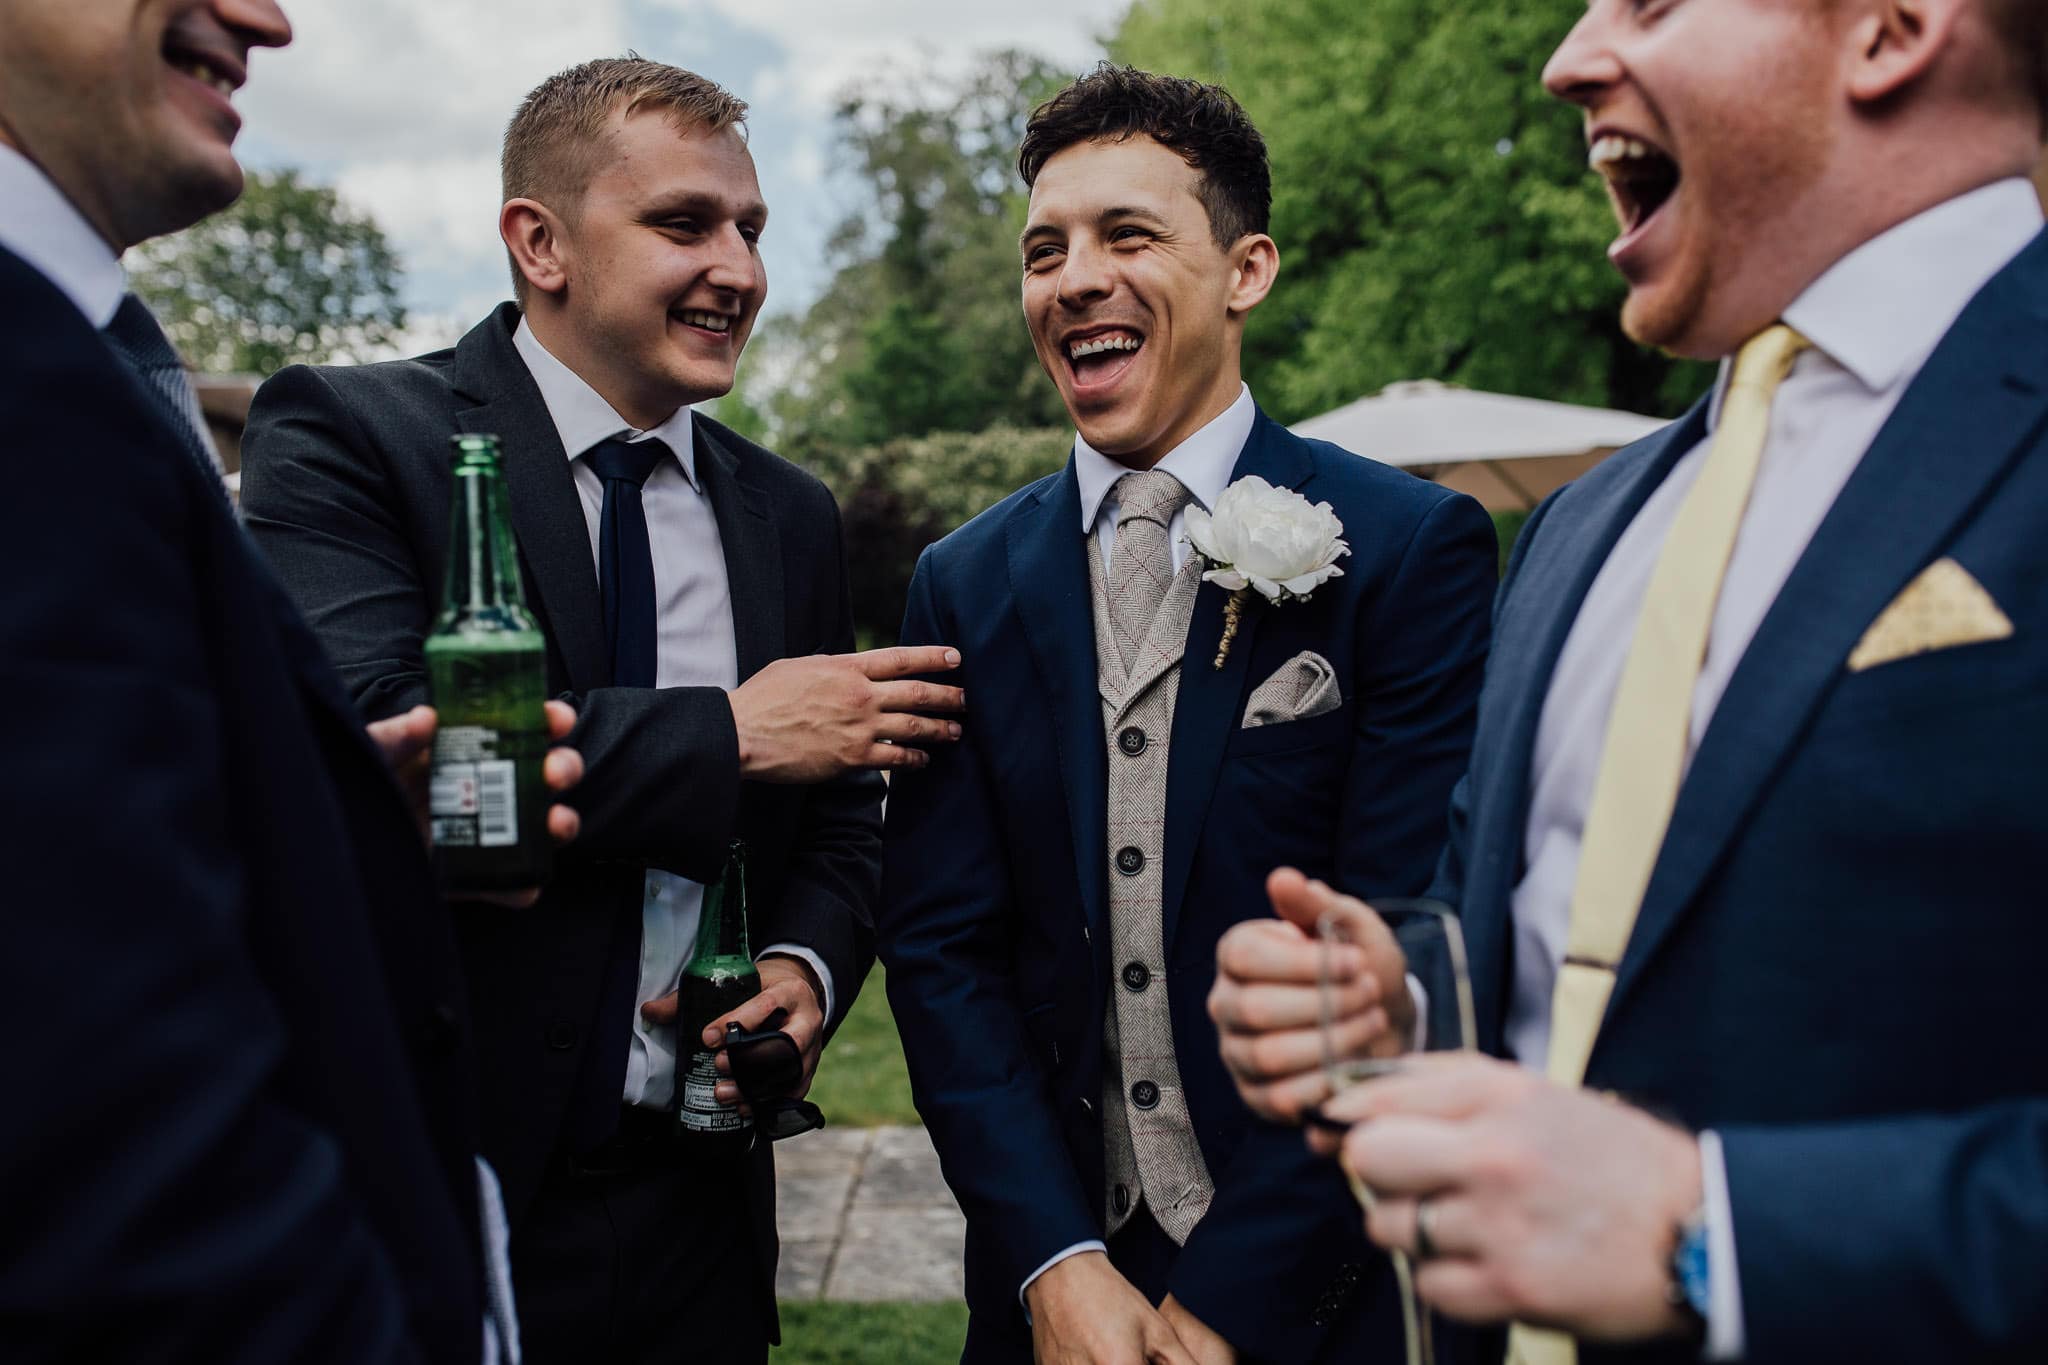 groom laughing with friends